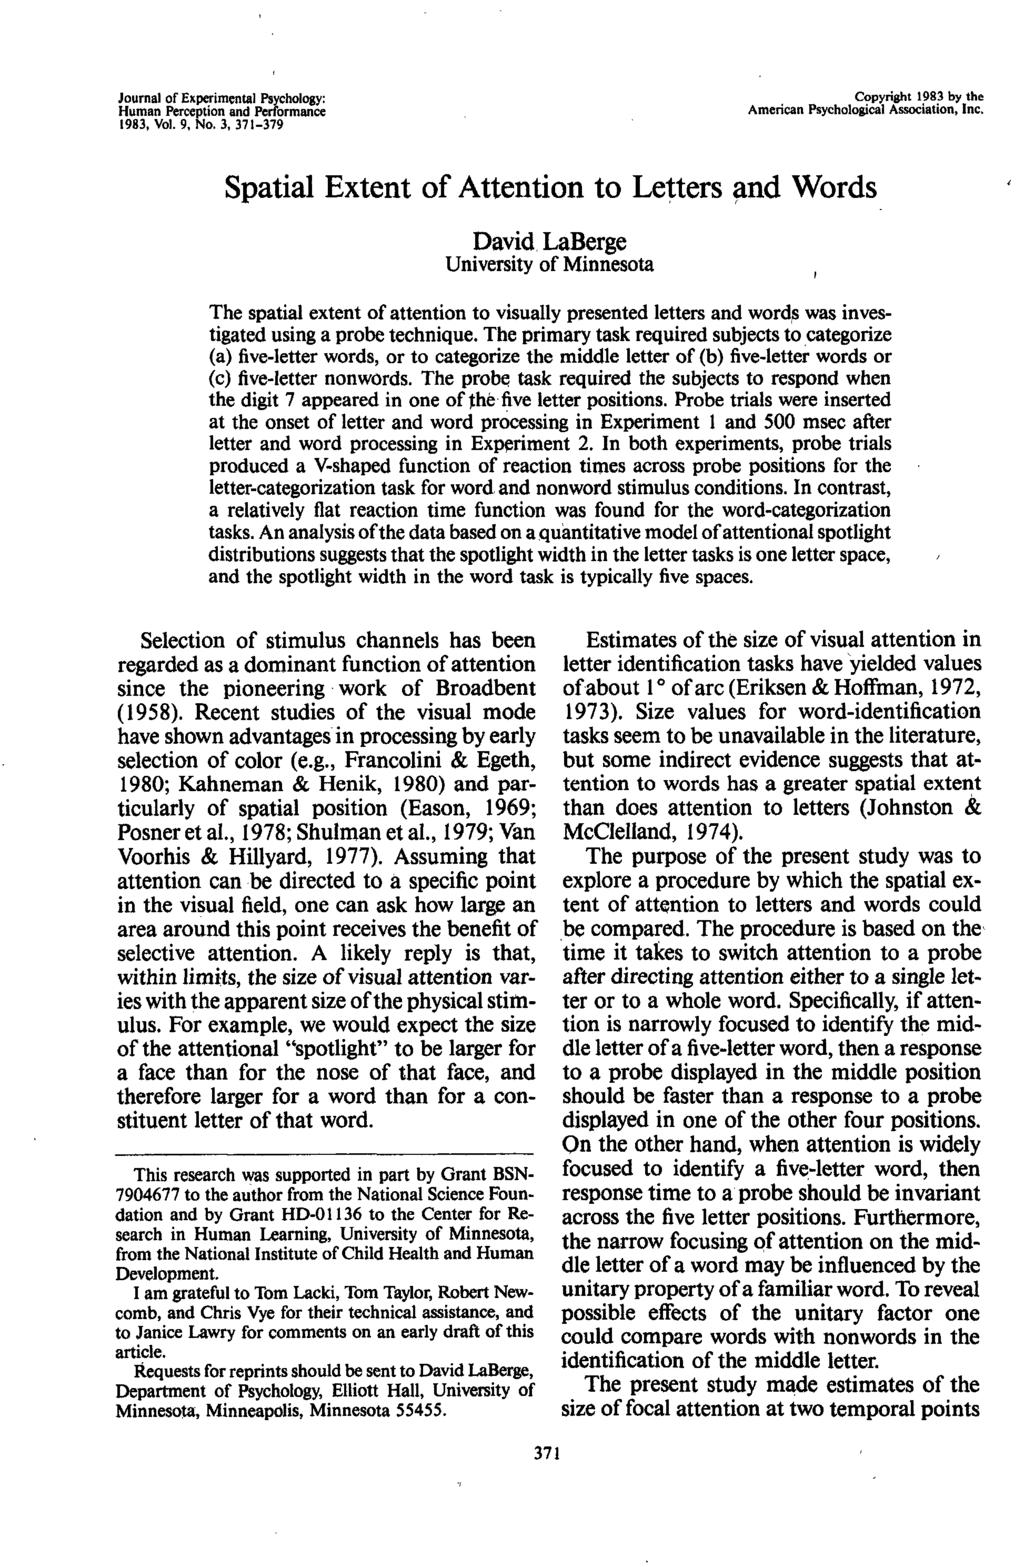 Journal of Experimental Psychology: Human Perception and Performance 1983, Vol. 9, No. 3, 371-379 Copyright 1983 by the American Psychological Association, Inc.